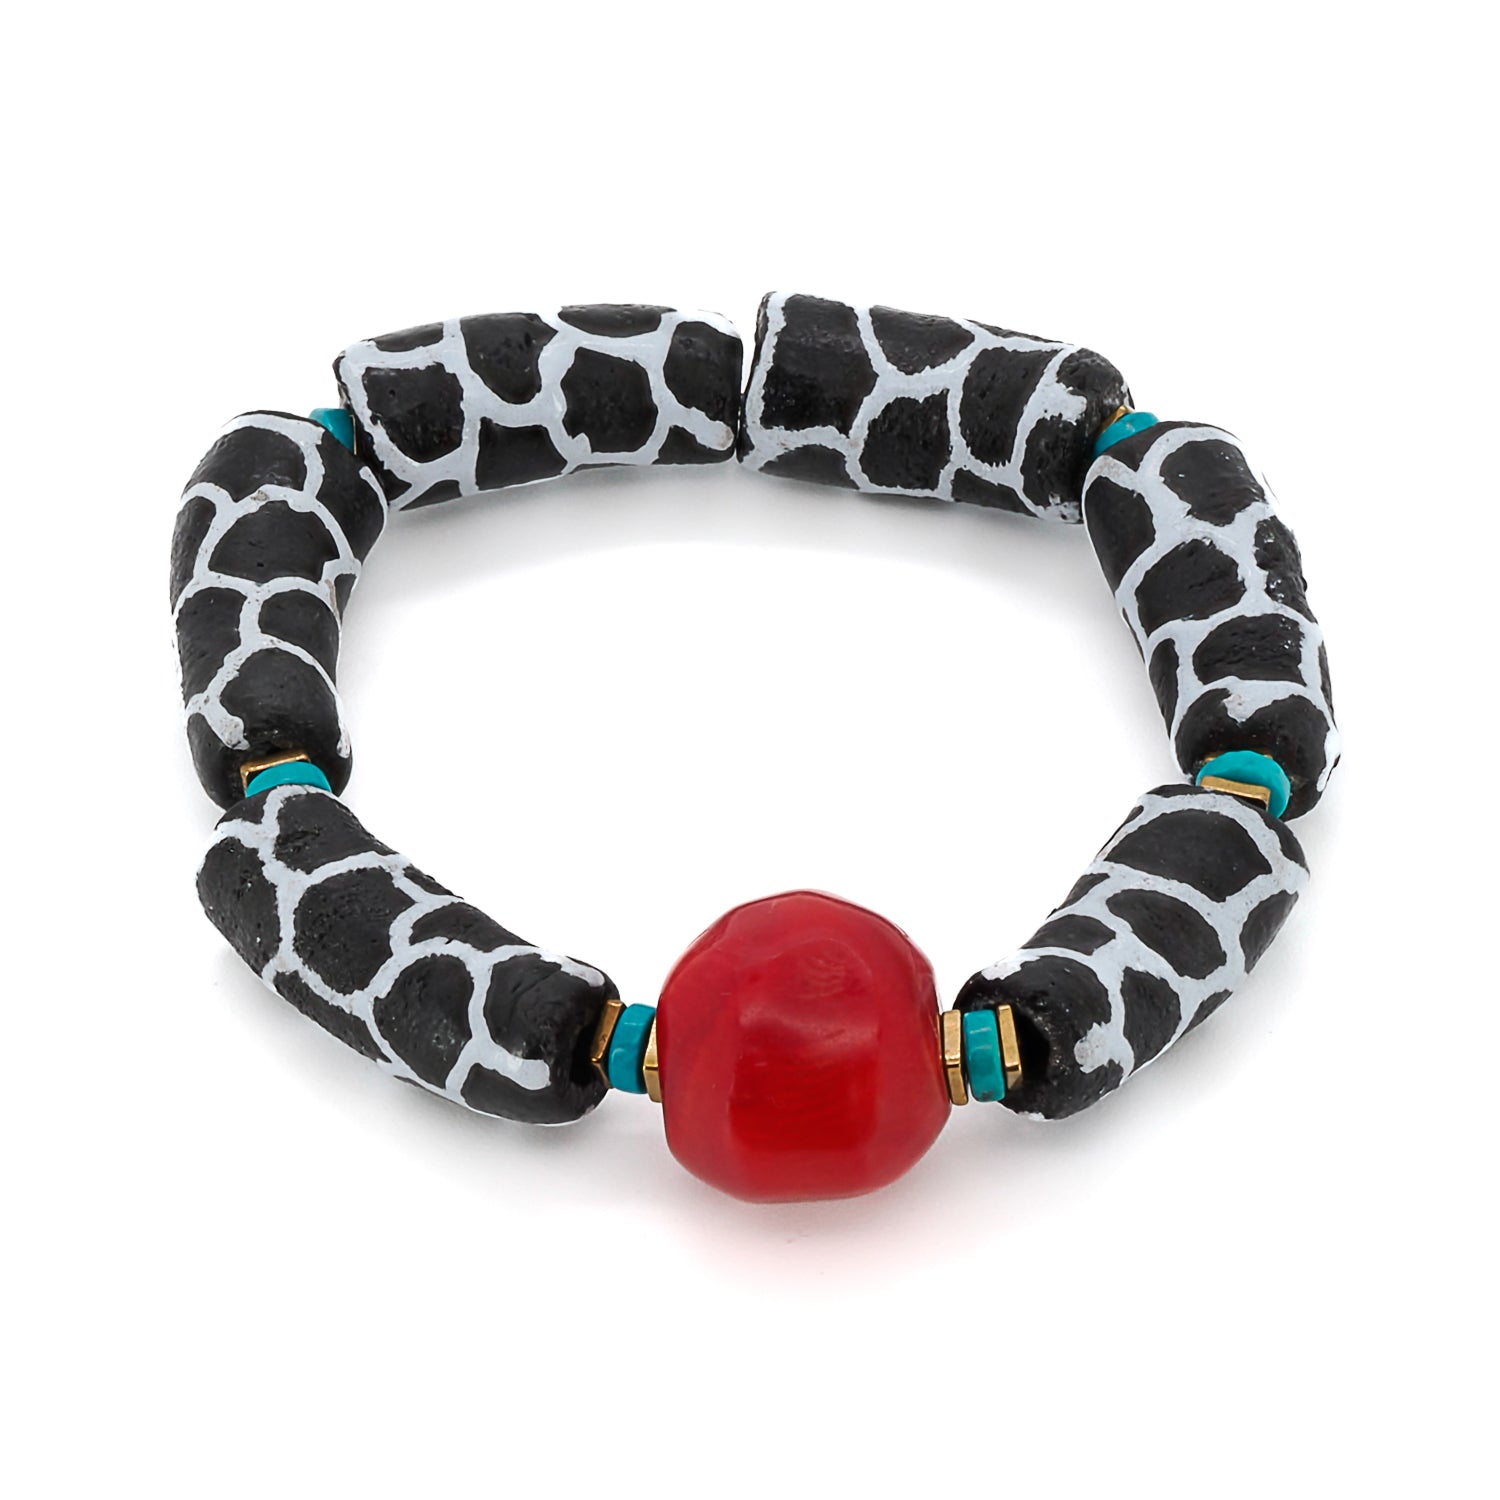 Close-up of the African Zebra Red Bracelet showcasing the black and white zebra tube beads and the vibrant red coral bead at the center.